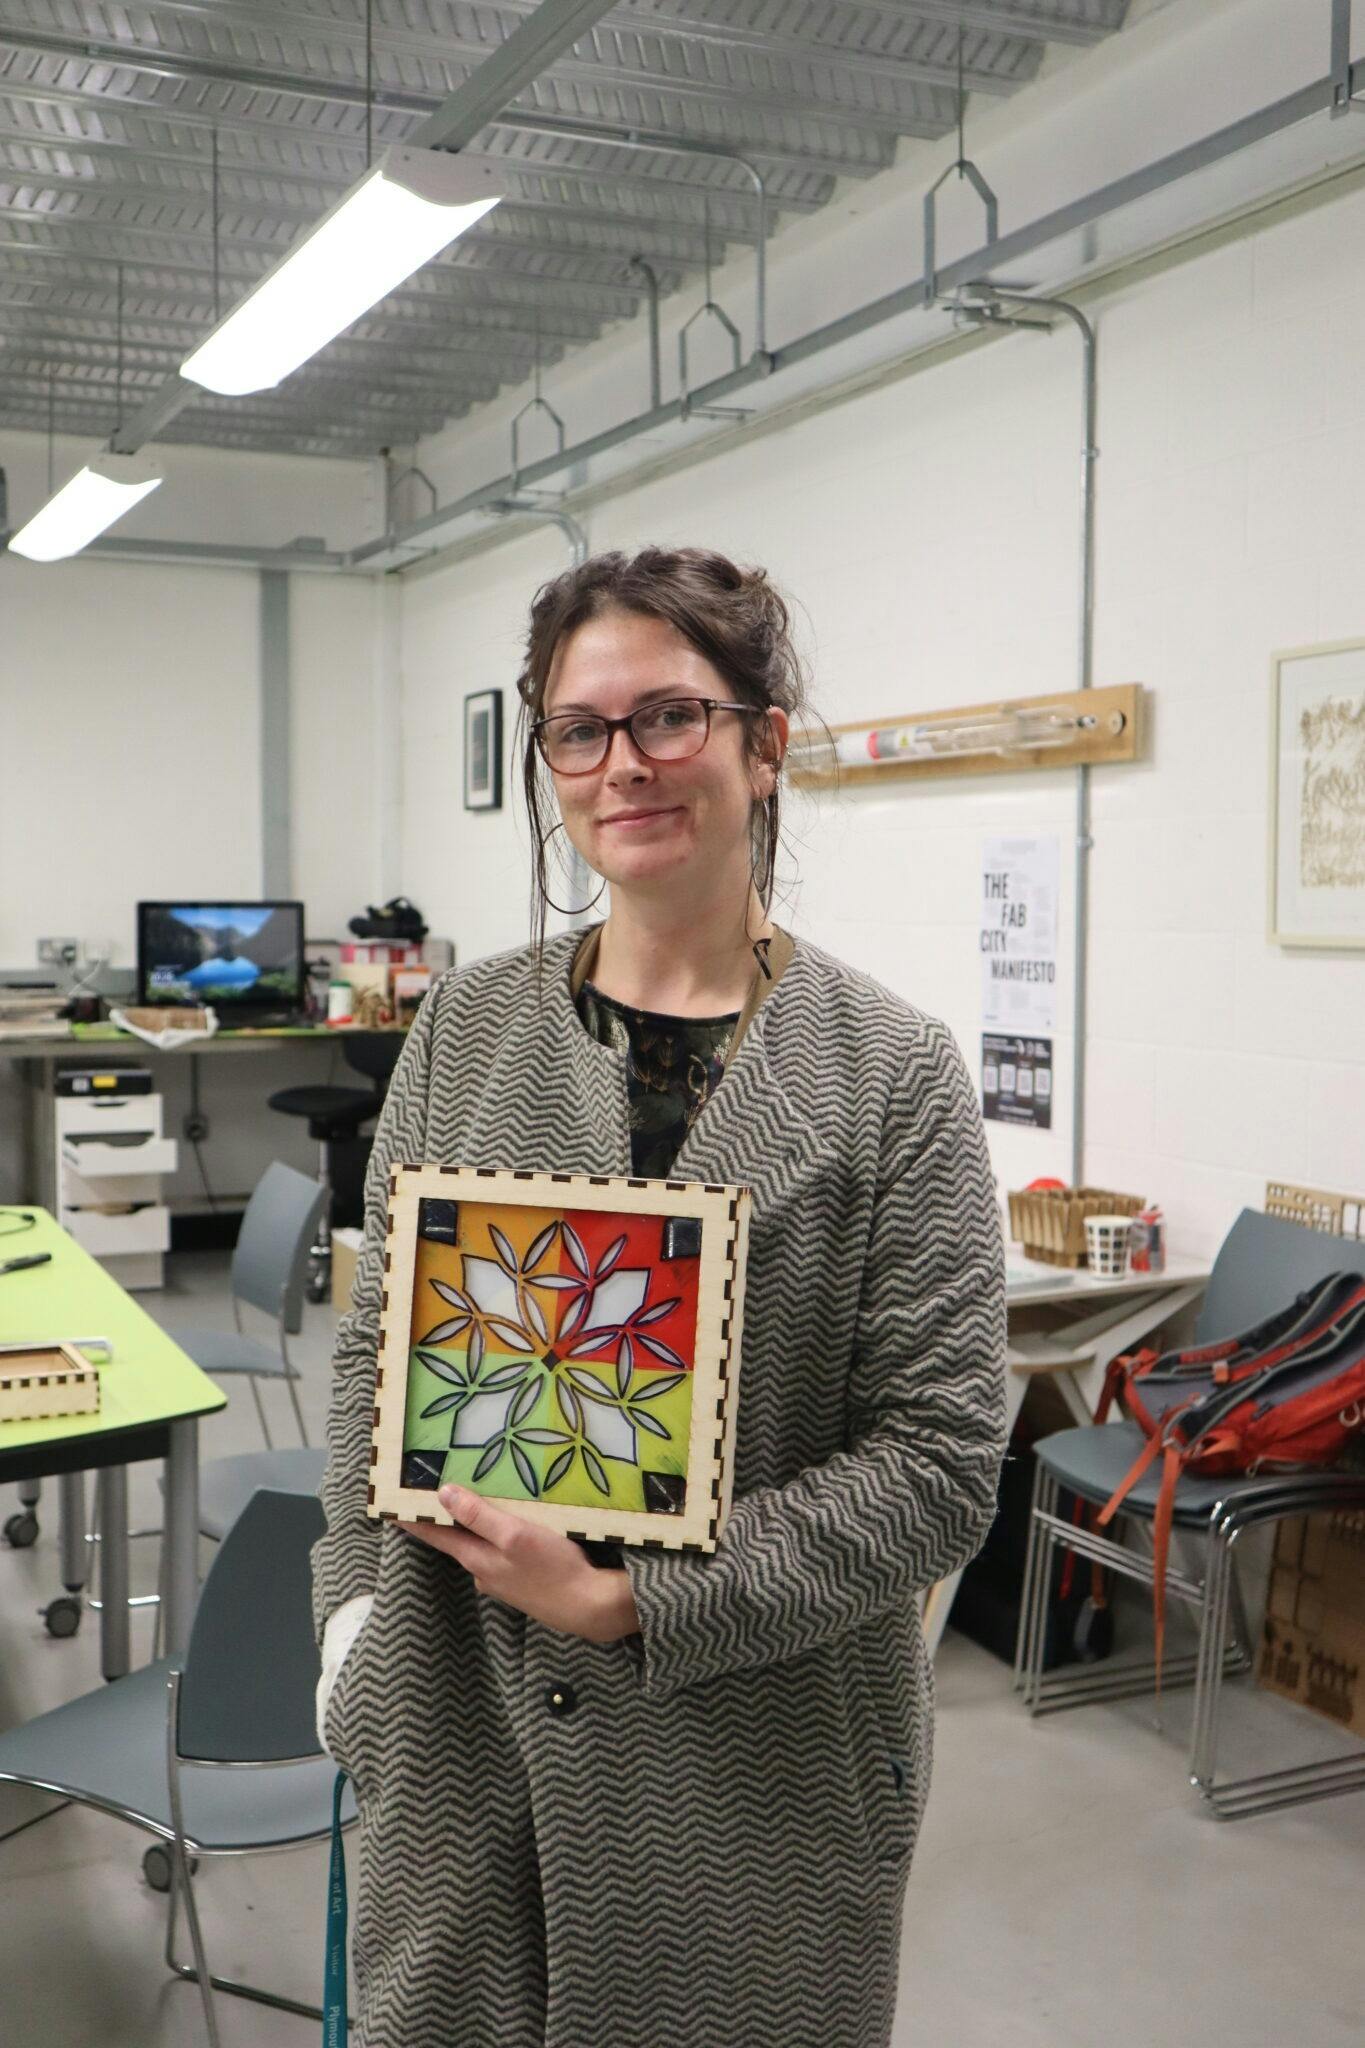 Participant Kerry Brosnan with her finished solar artwork